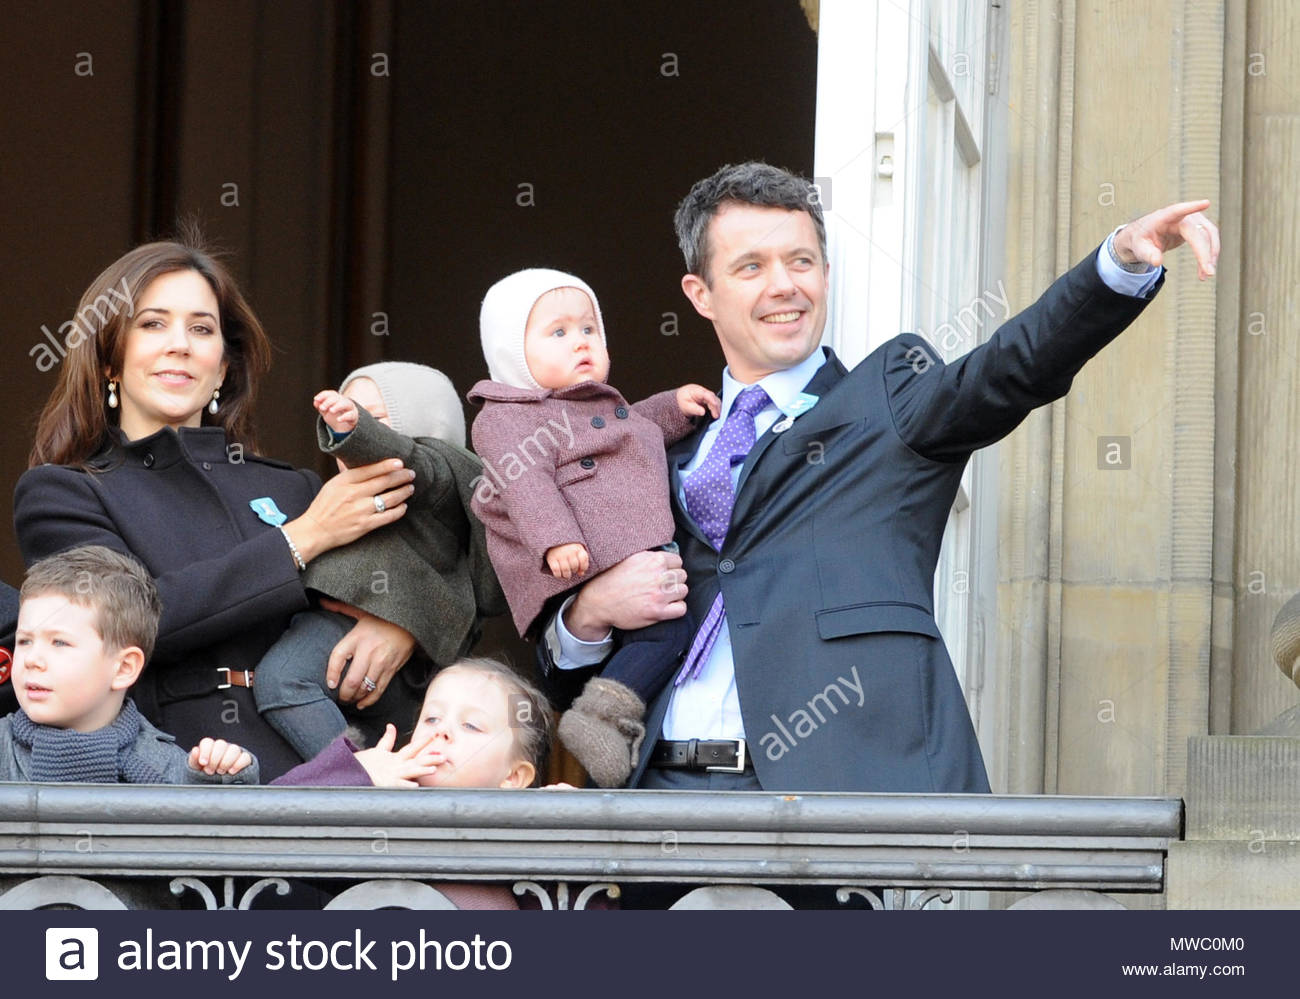 crown-prince-frederik-of-denmark-princess-mary-and-their-children-the-danish-royal-family-wave-from-the-balcony-at-the-40th-jubilee-celebrations-for-queen-margrethe-of-denmark-MWC0M0.jpg